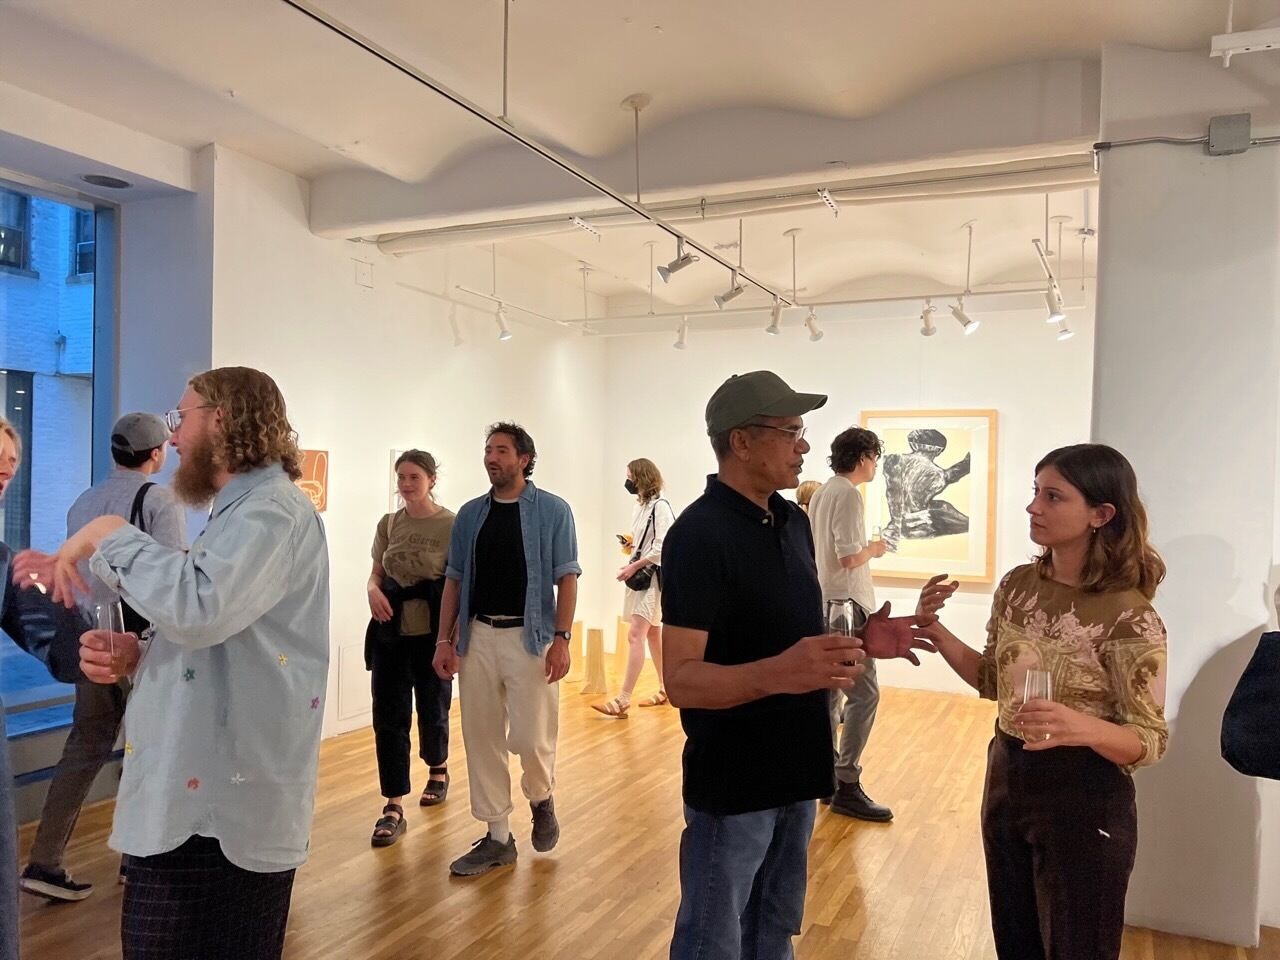 People conversing at an art gallery with paintings on the walls.